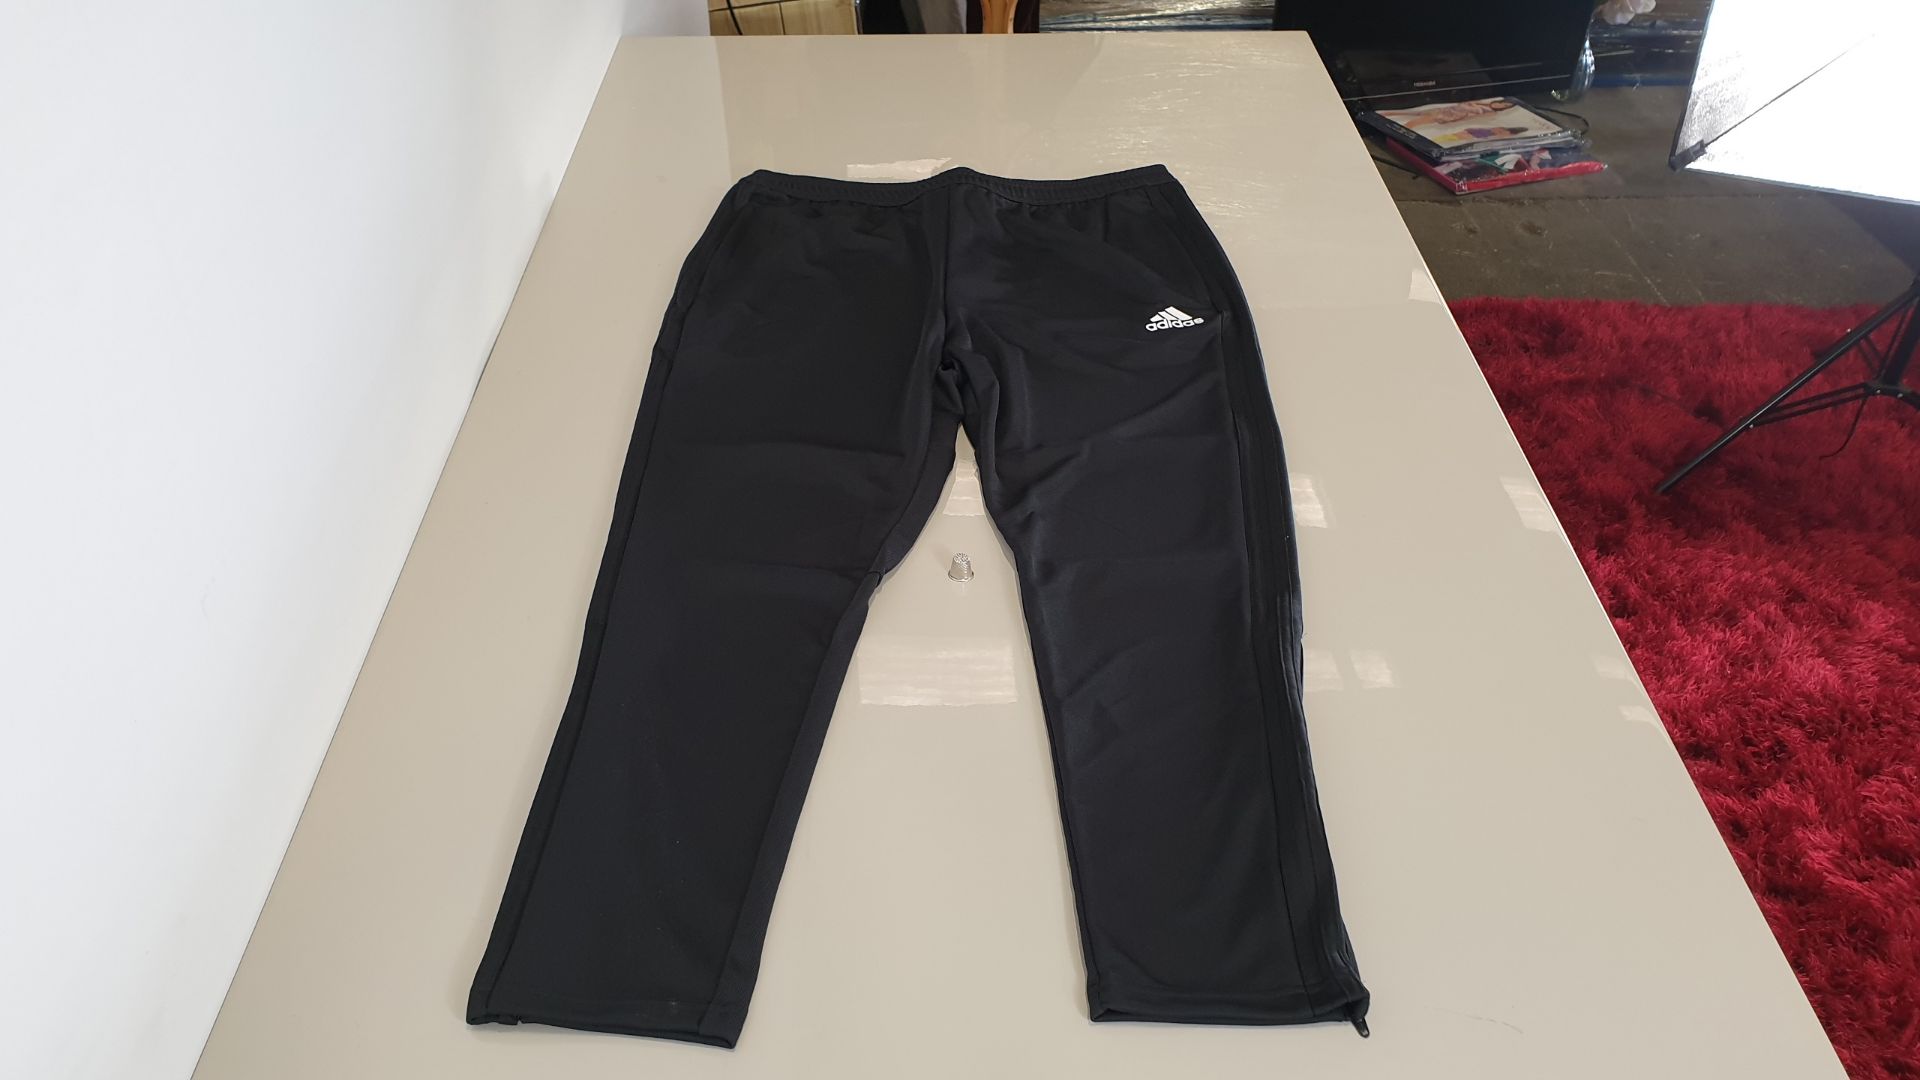 (LOT FOR THURSDAY 28TH MAY AUCTION) 15 X BRAND NEW ADIDAS BLACK / WHITE TRACK / JOGGING PANTS - CODE